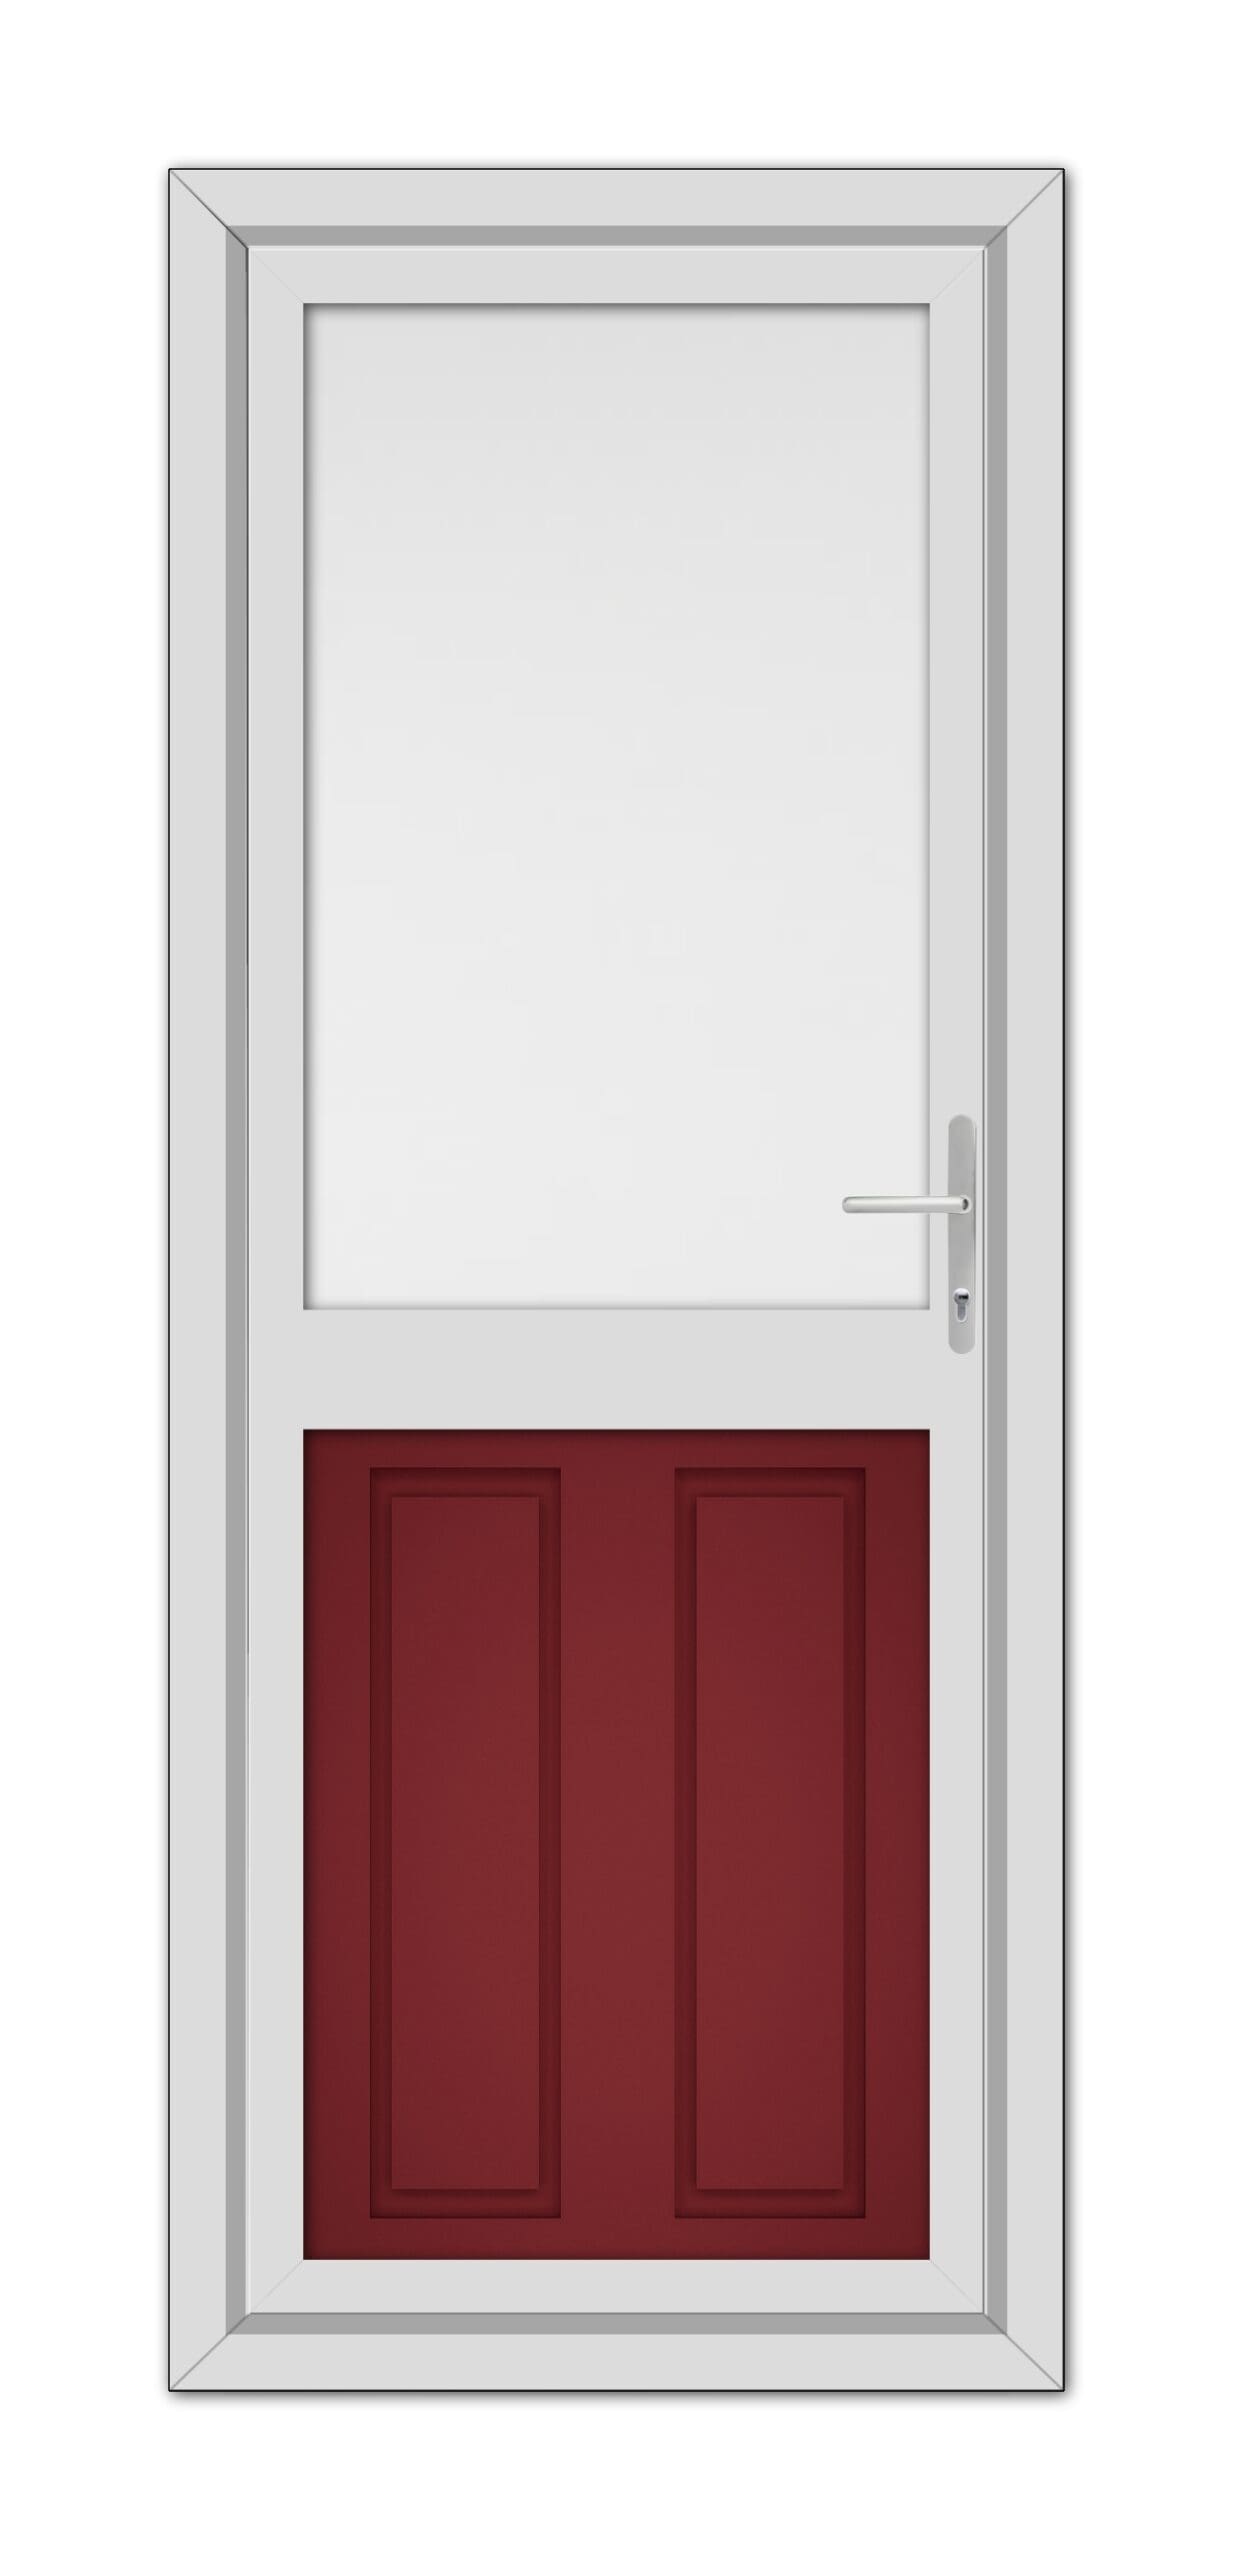 A modern Red Manor Half uPVC Back Door with a small upper window, featuring two lower red panels and a metallic handle on the right side.